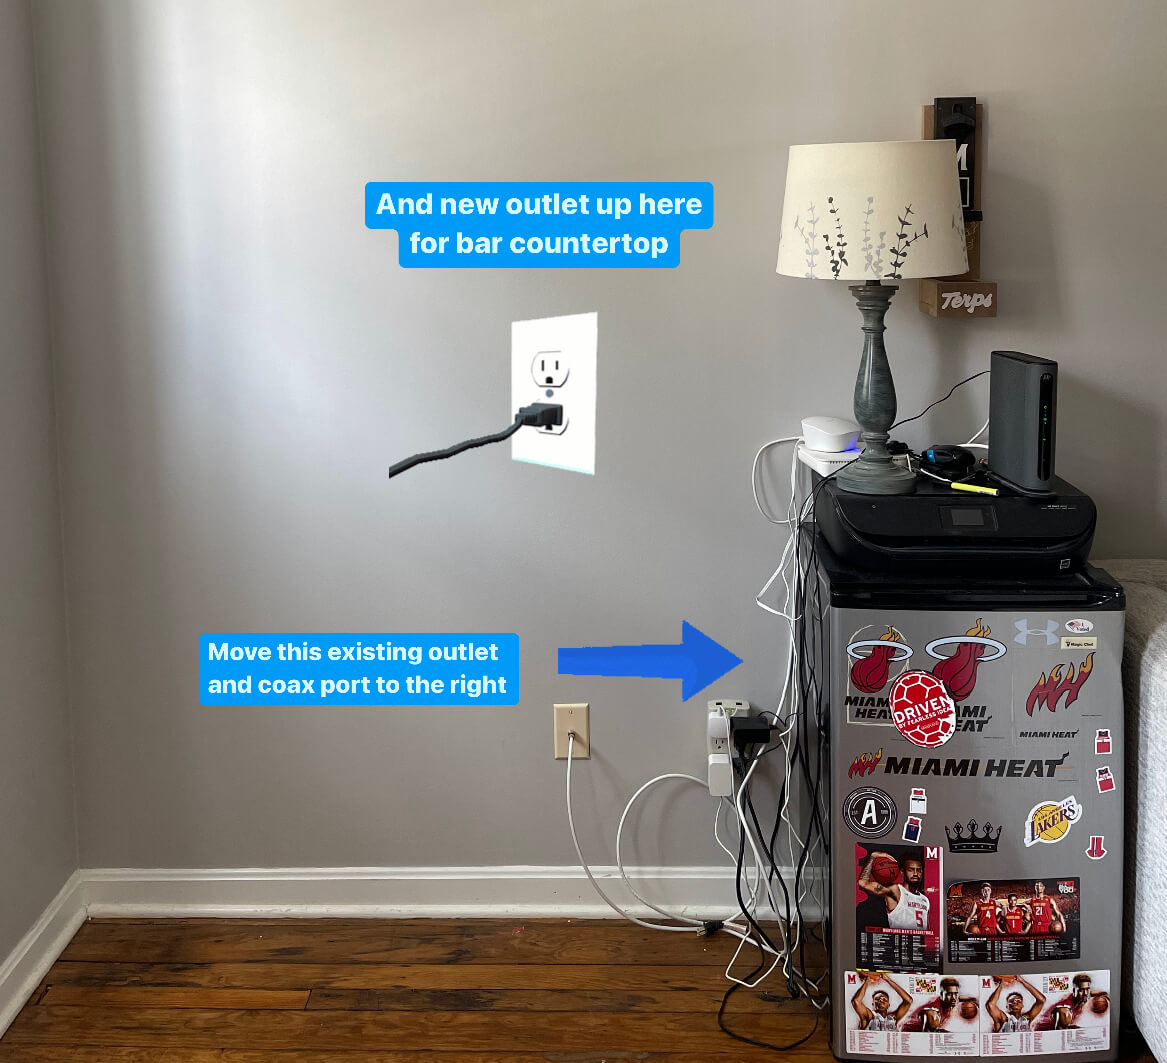 Showcasing how I'm going to move the existing outlet and add a new countertop height outlet.